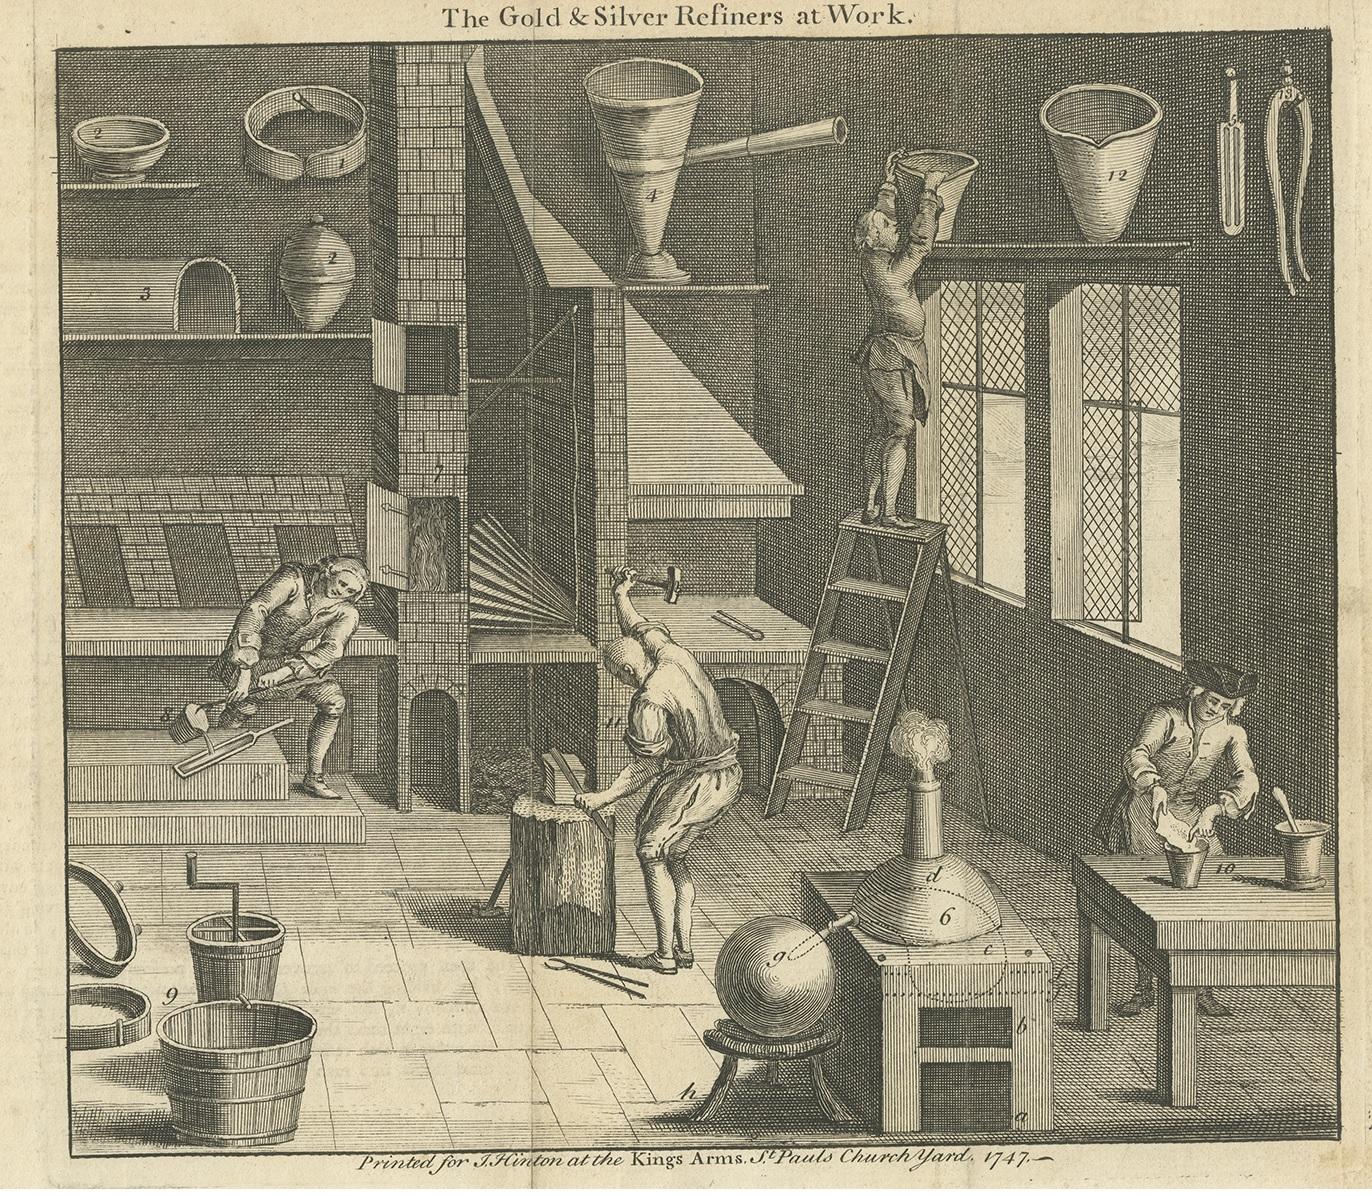 Antique print titled 'The Gold & Silver Refiners at Work'. View of a workshop with three men at work, the one to left pouring liquid into a mould, the one at centre hammering a metal tool, the one to right pouring a substance into pots. This print